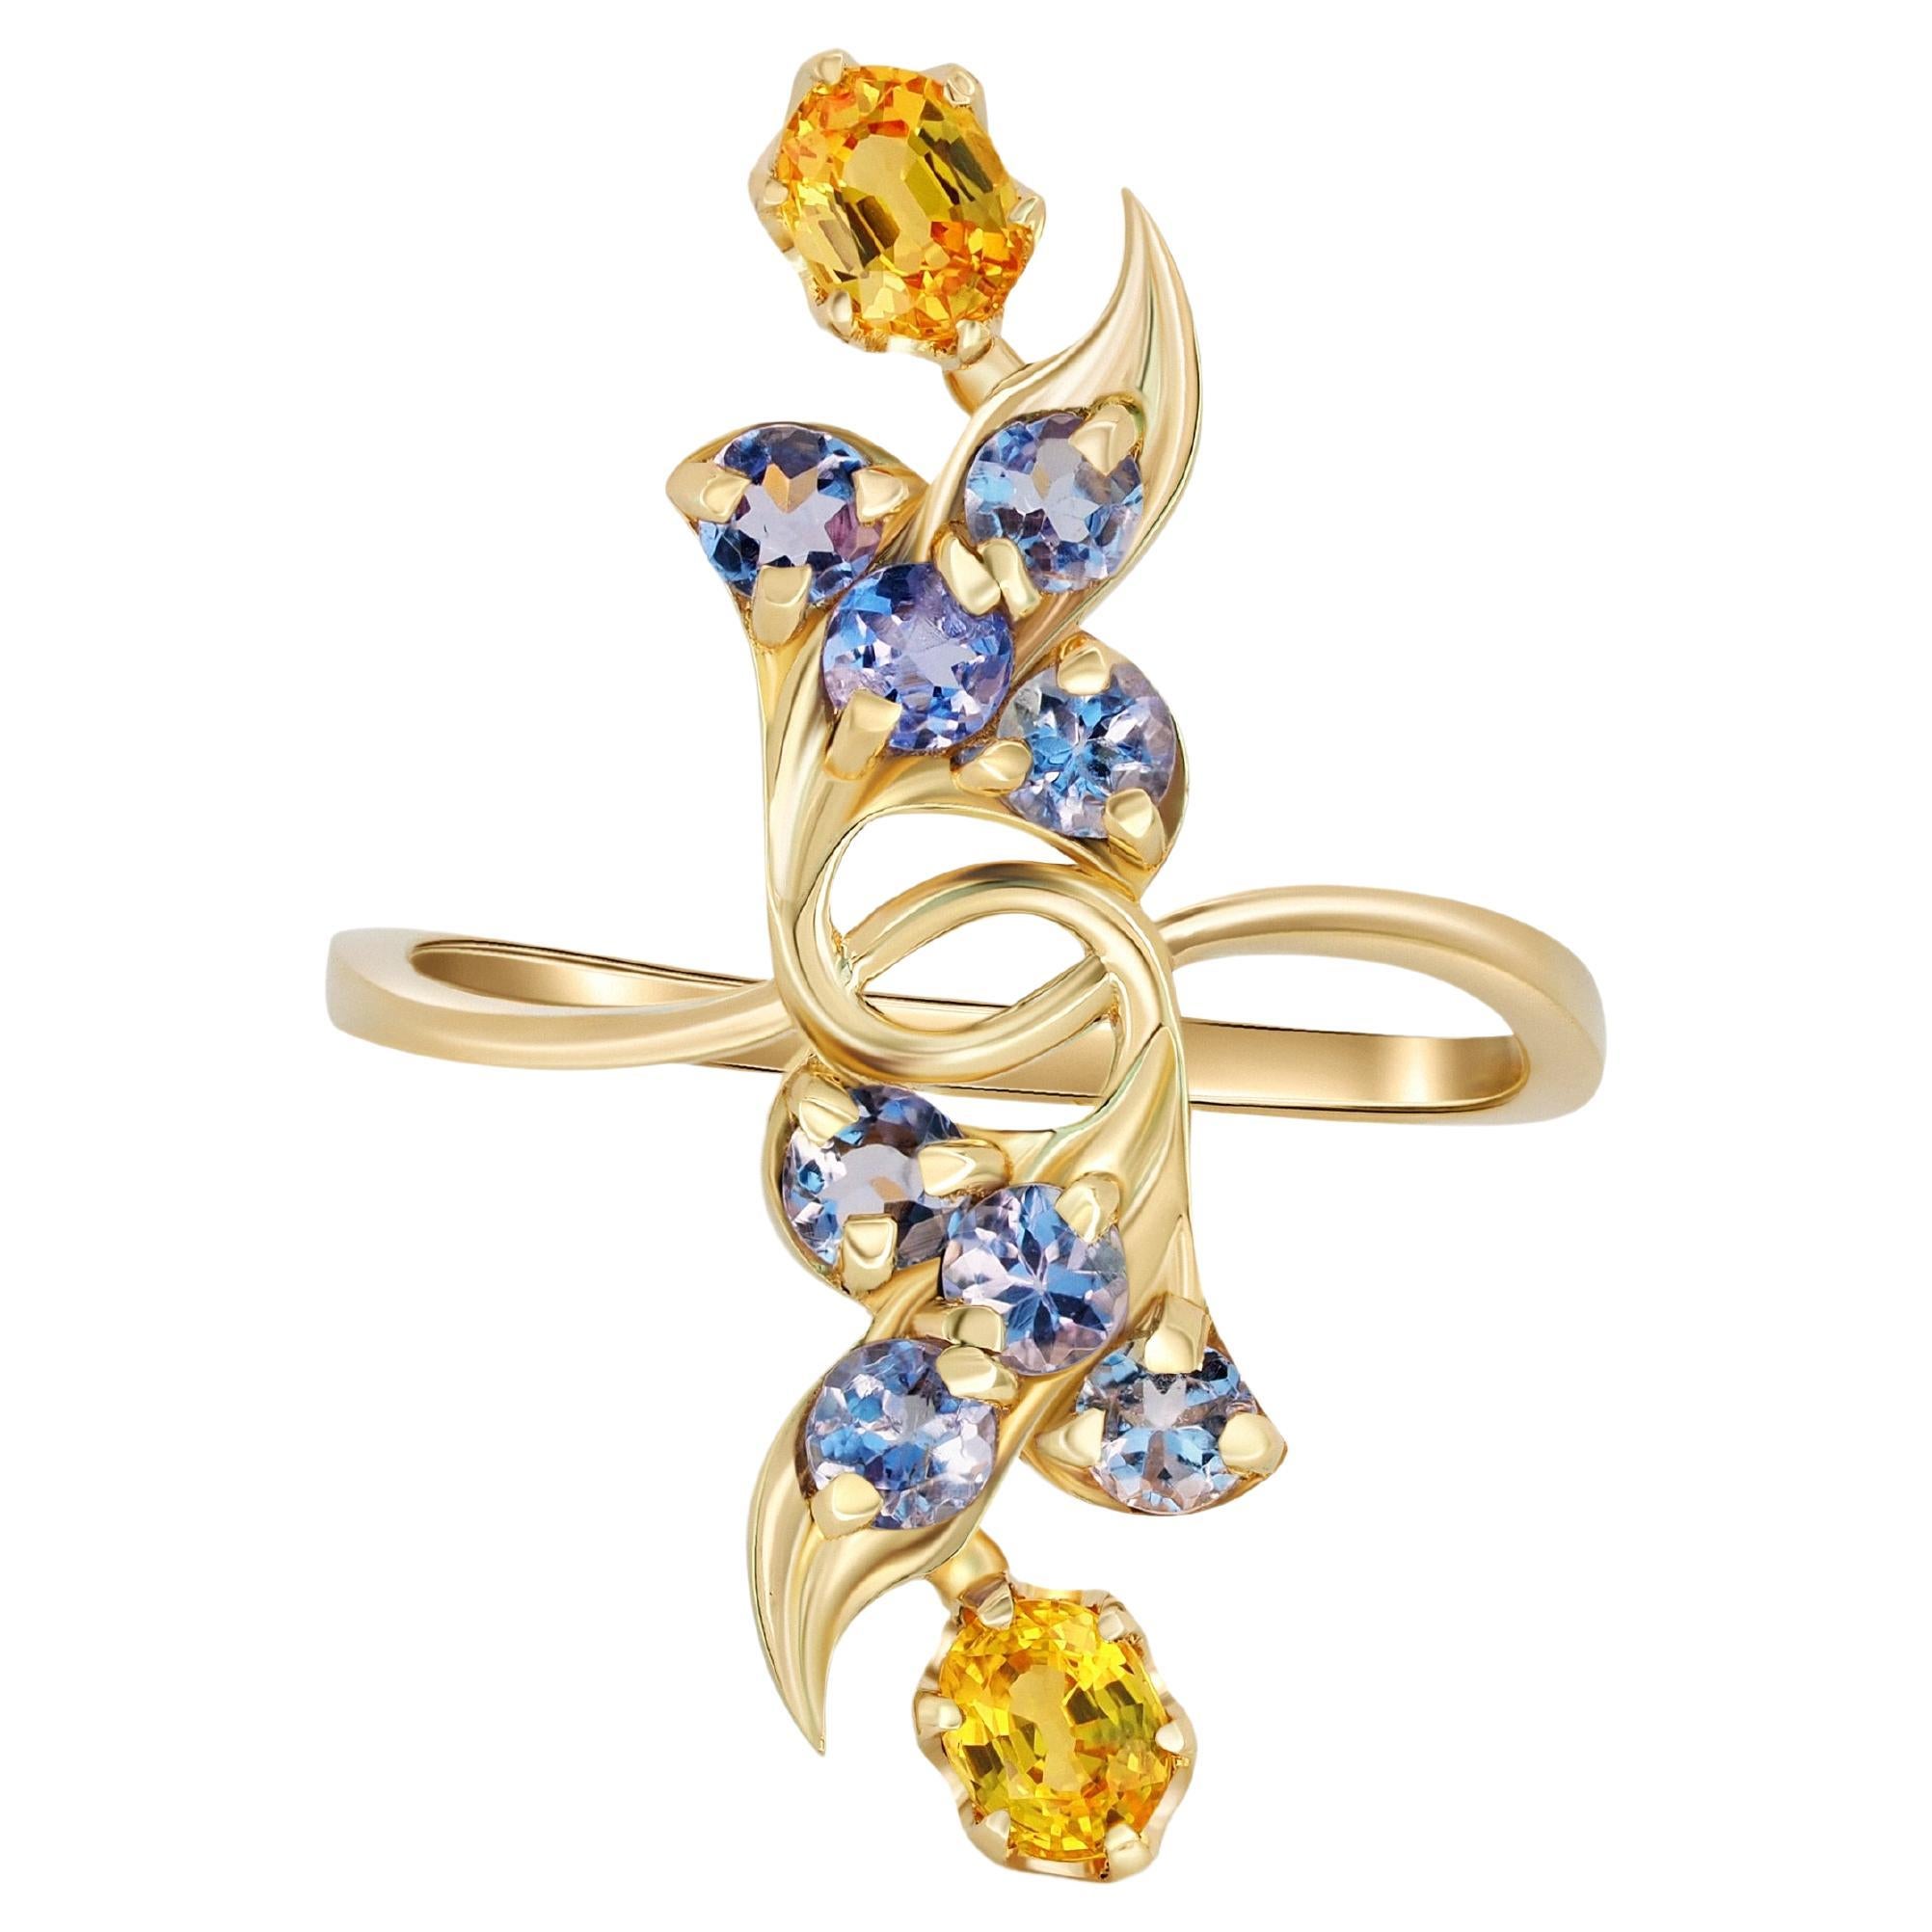 Sapphire gold ring. 